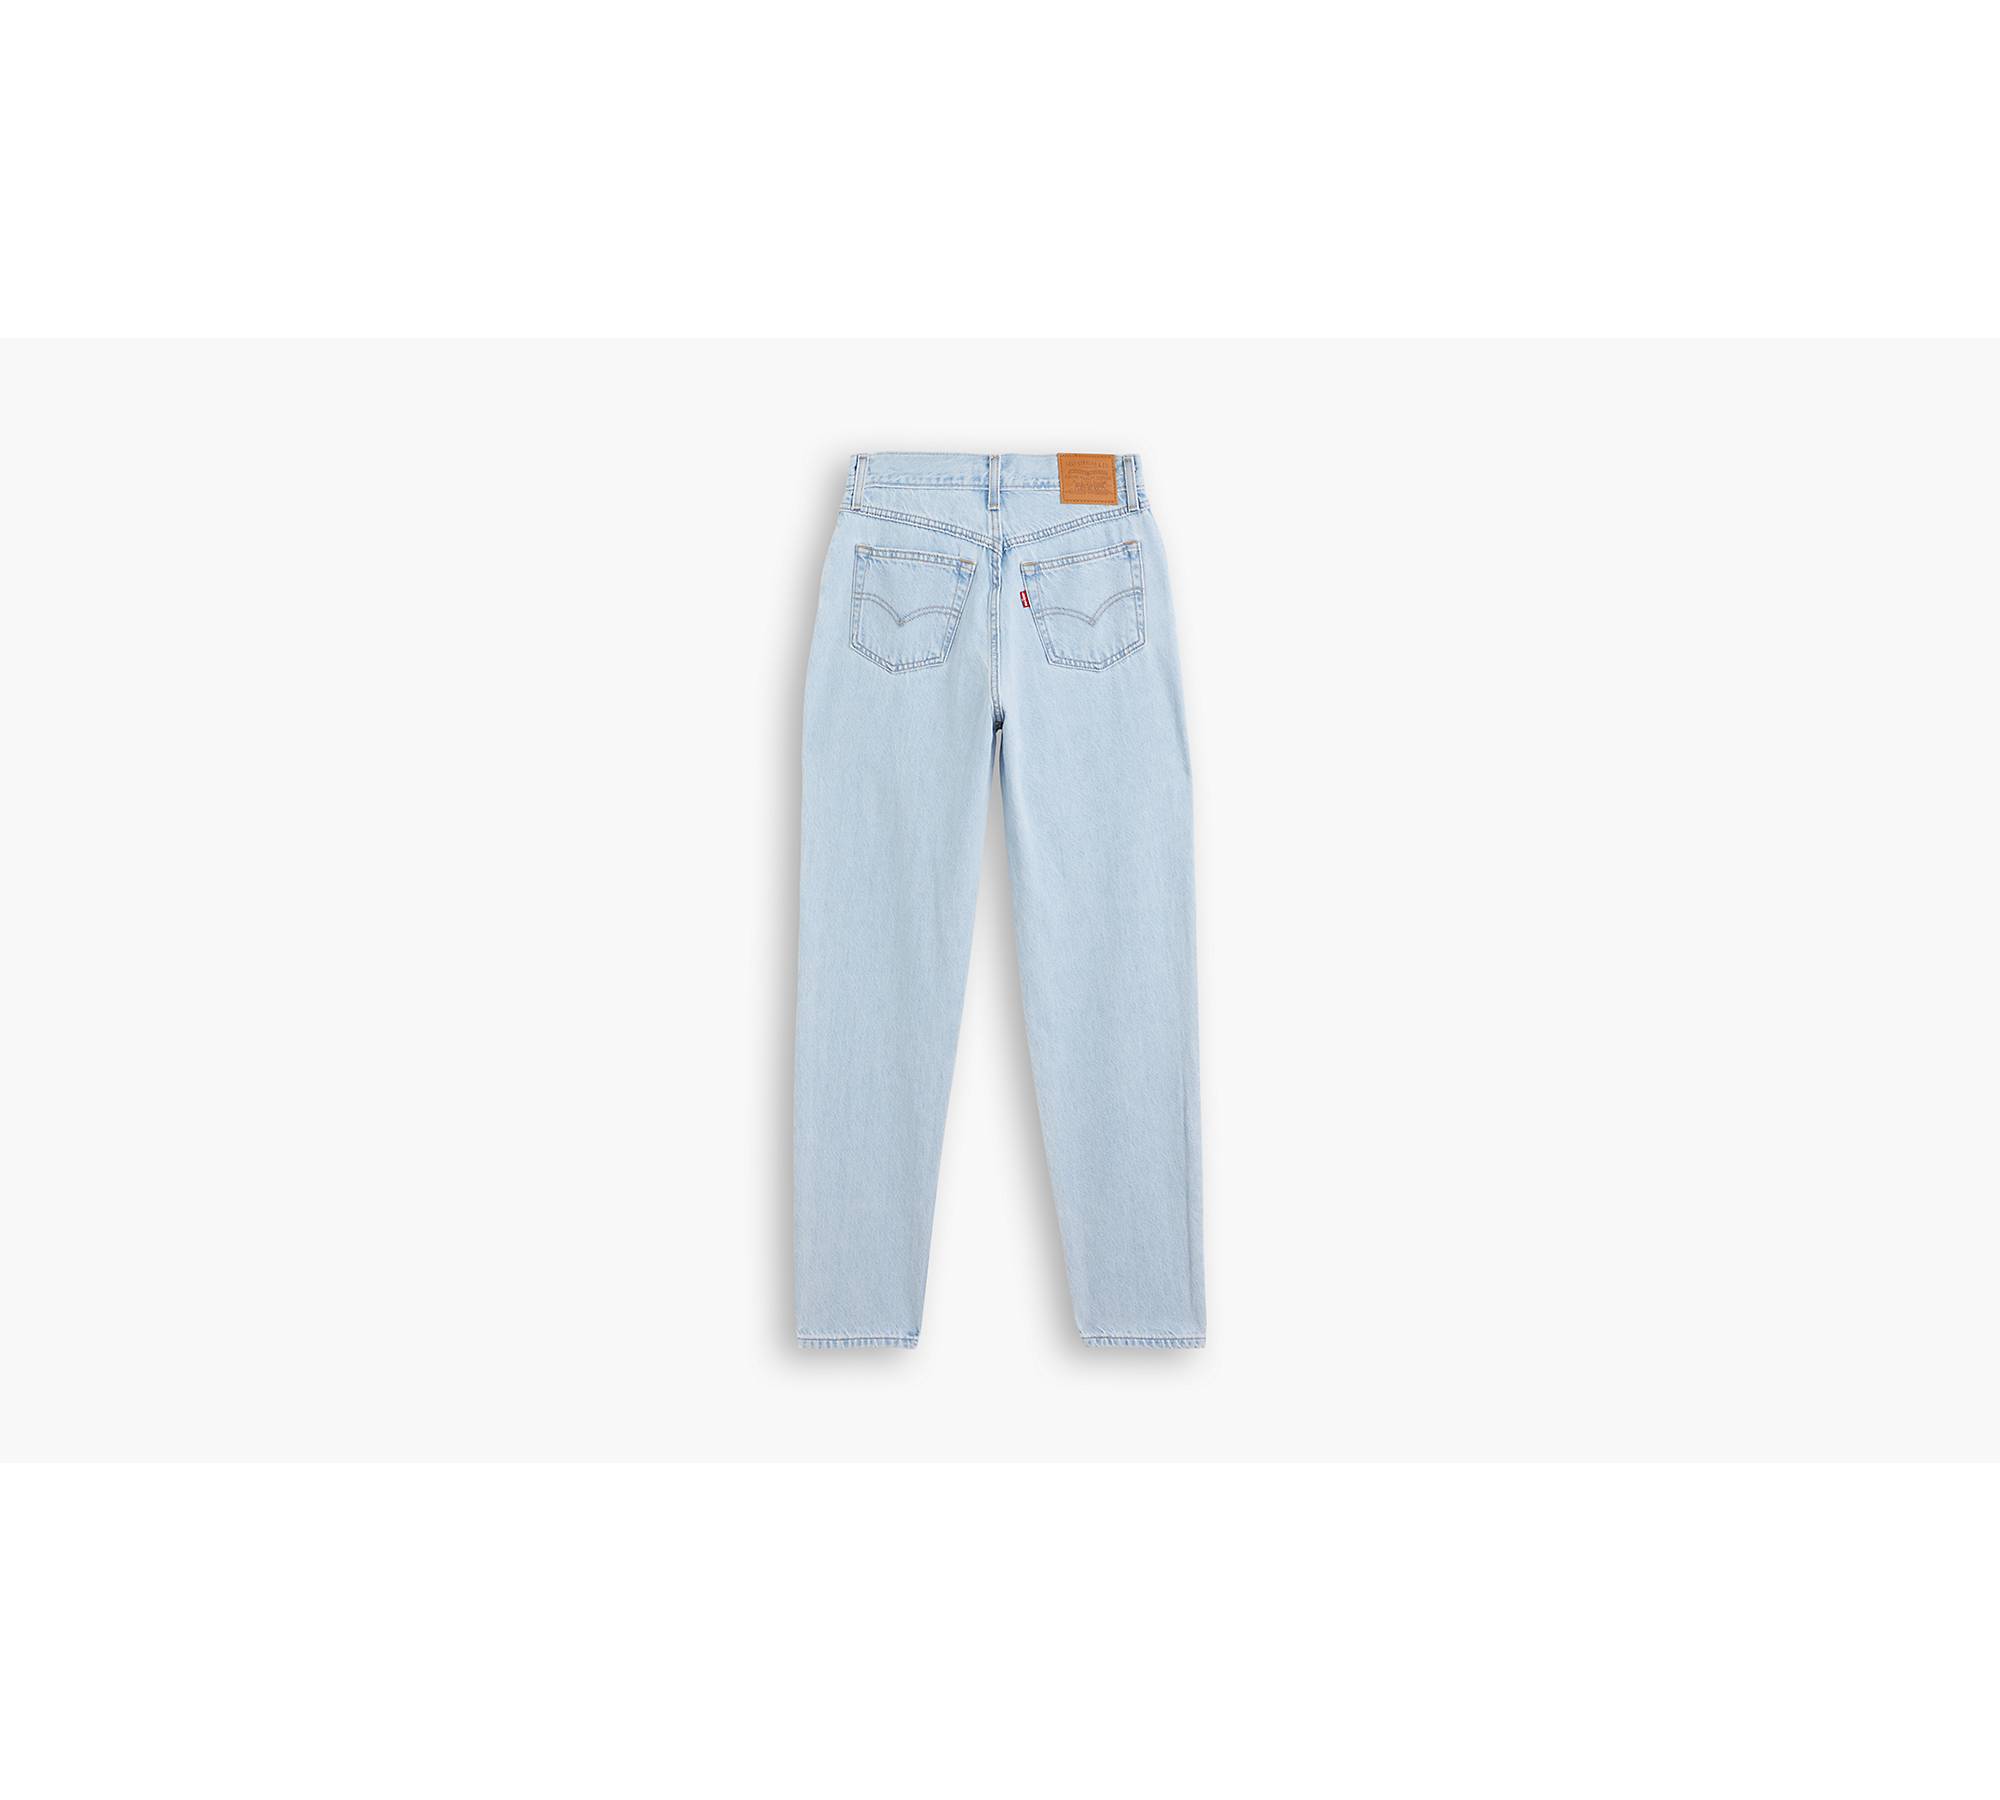 LEVIS 80's MOM JEAN - CLEARANCE